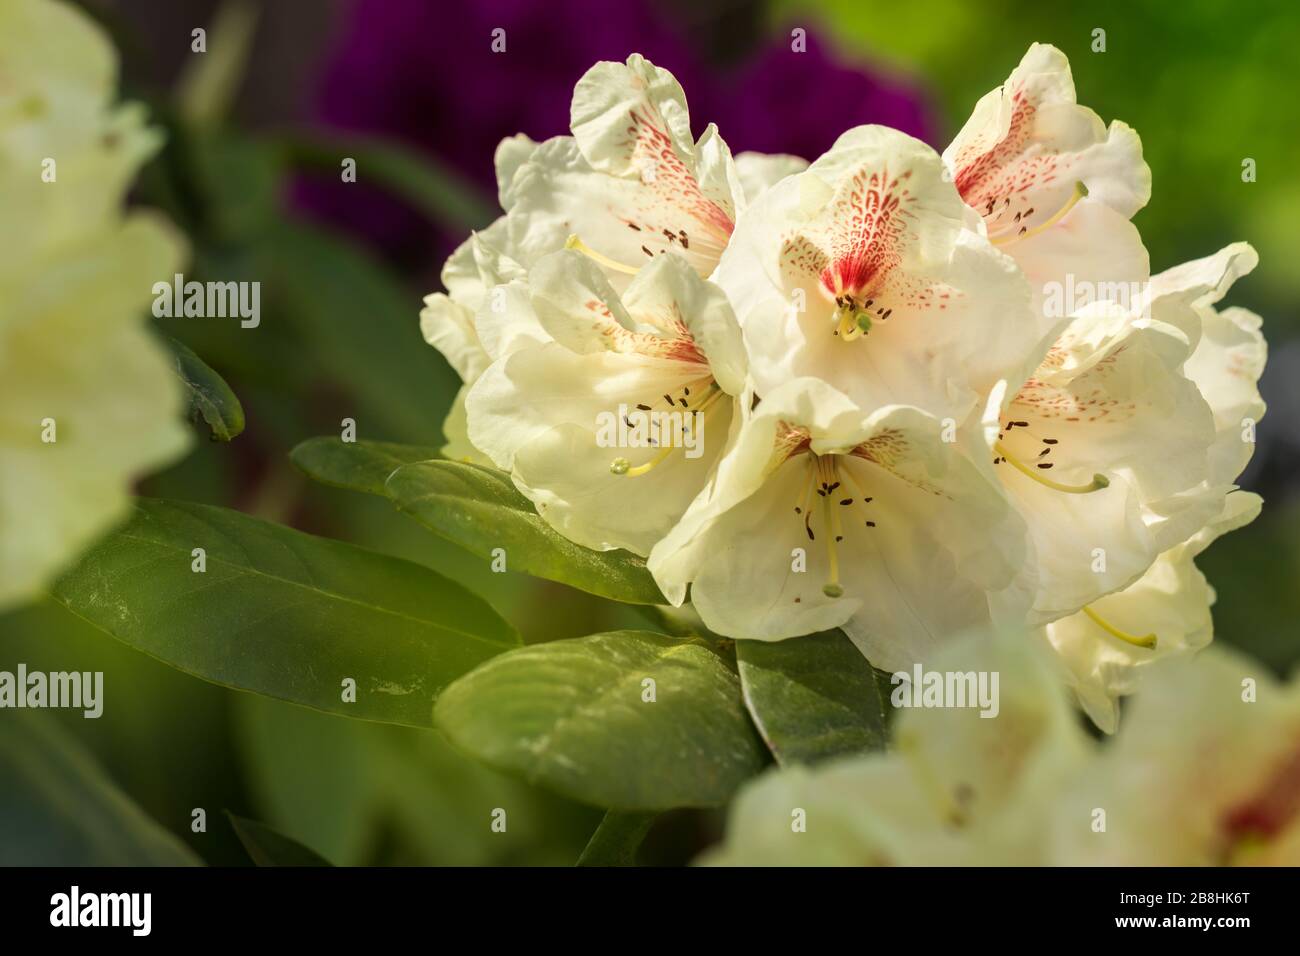 Beautiful blooming Rhododendron (Ericaceae), Germany Schöner blühender Rhododendron (Ericaceae), Deutschland Stock Photo